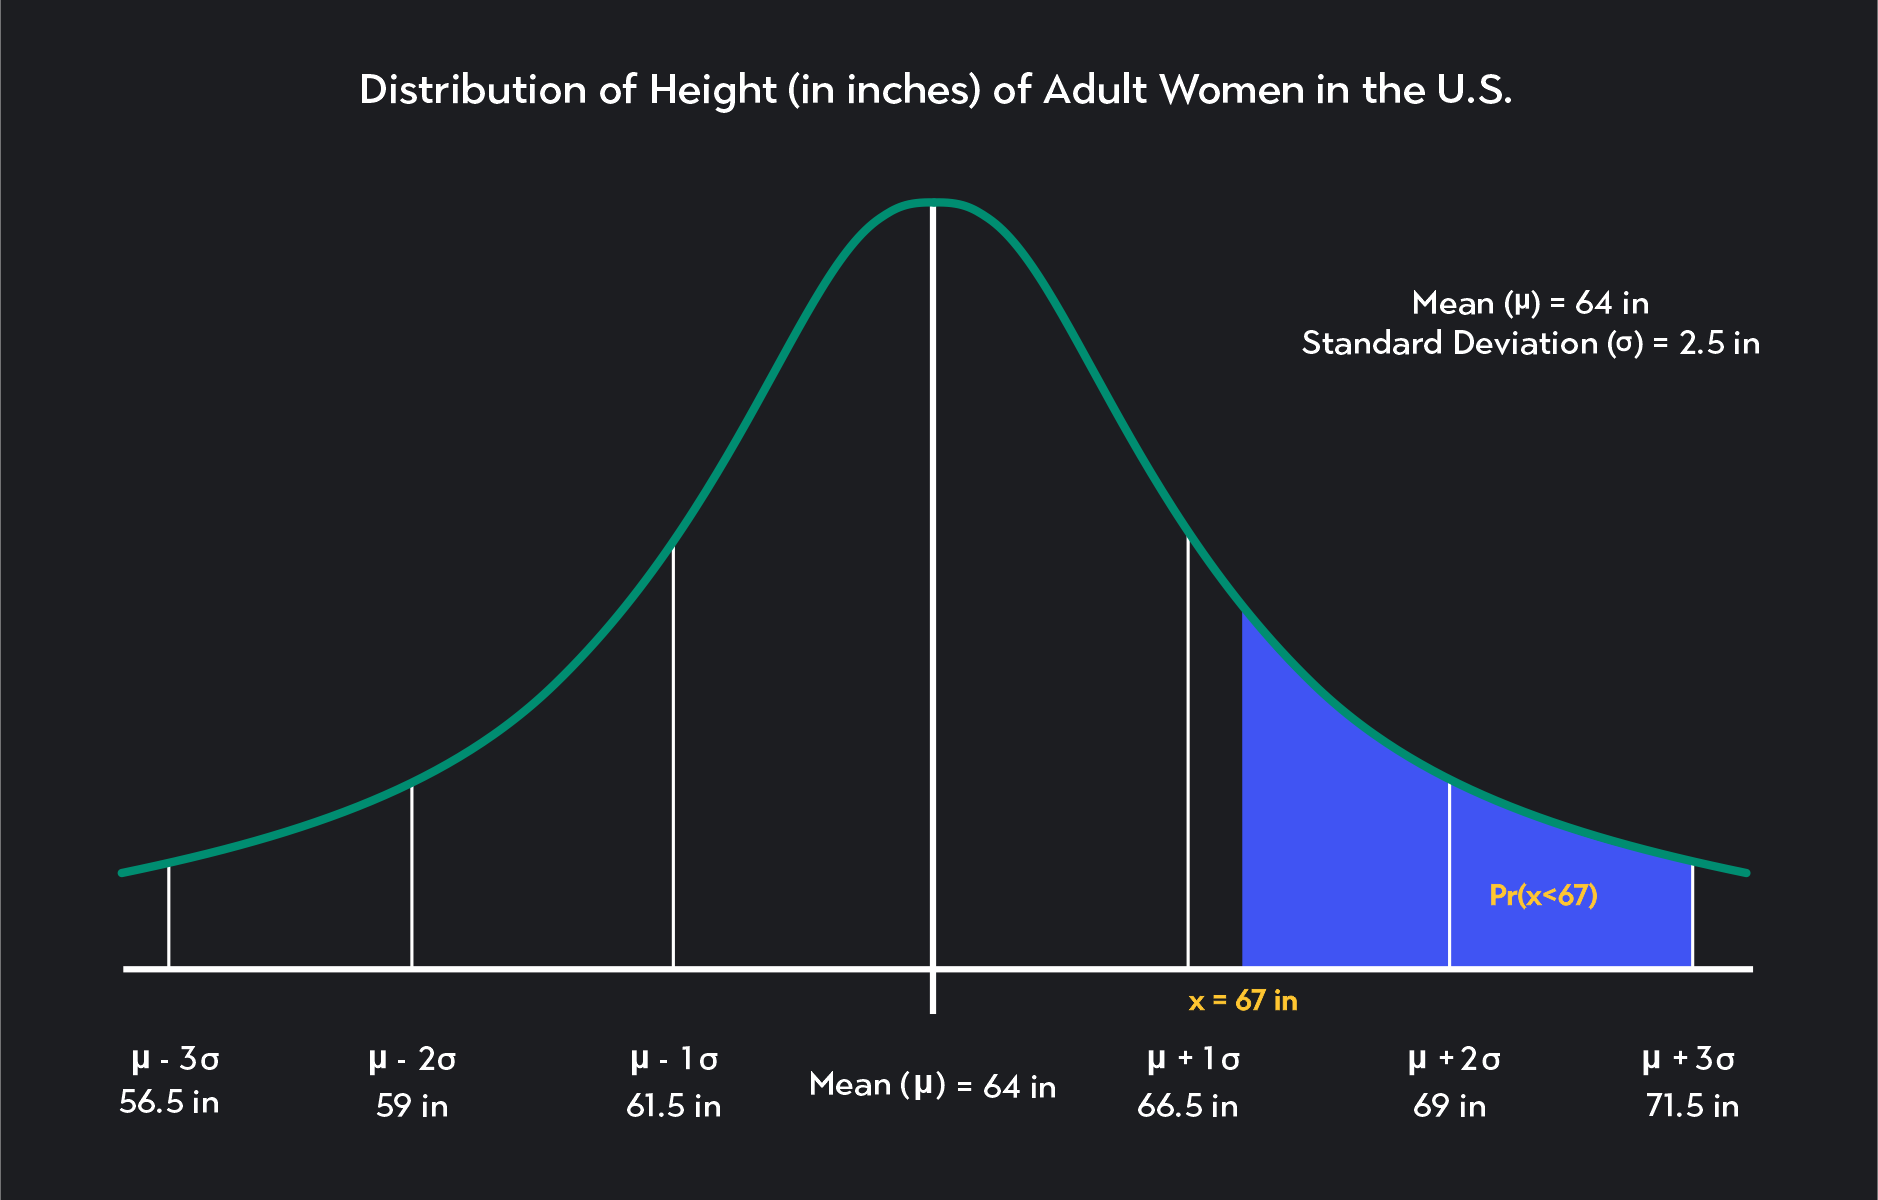 Normal Distribution graph showing the probability that an American woman will be more than 67 inches tall